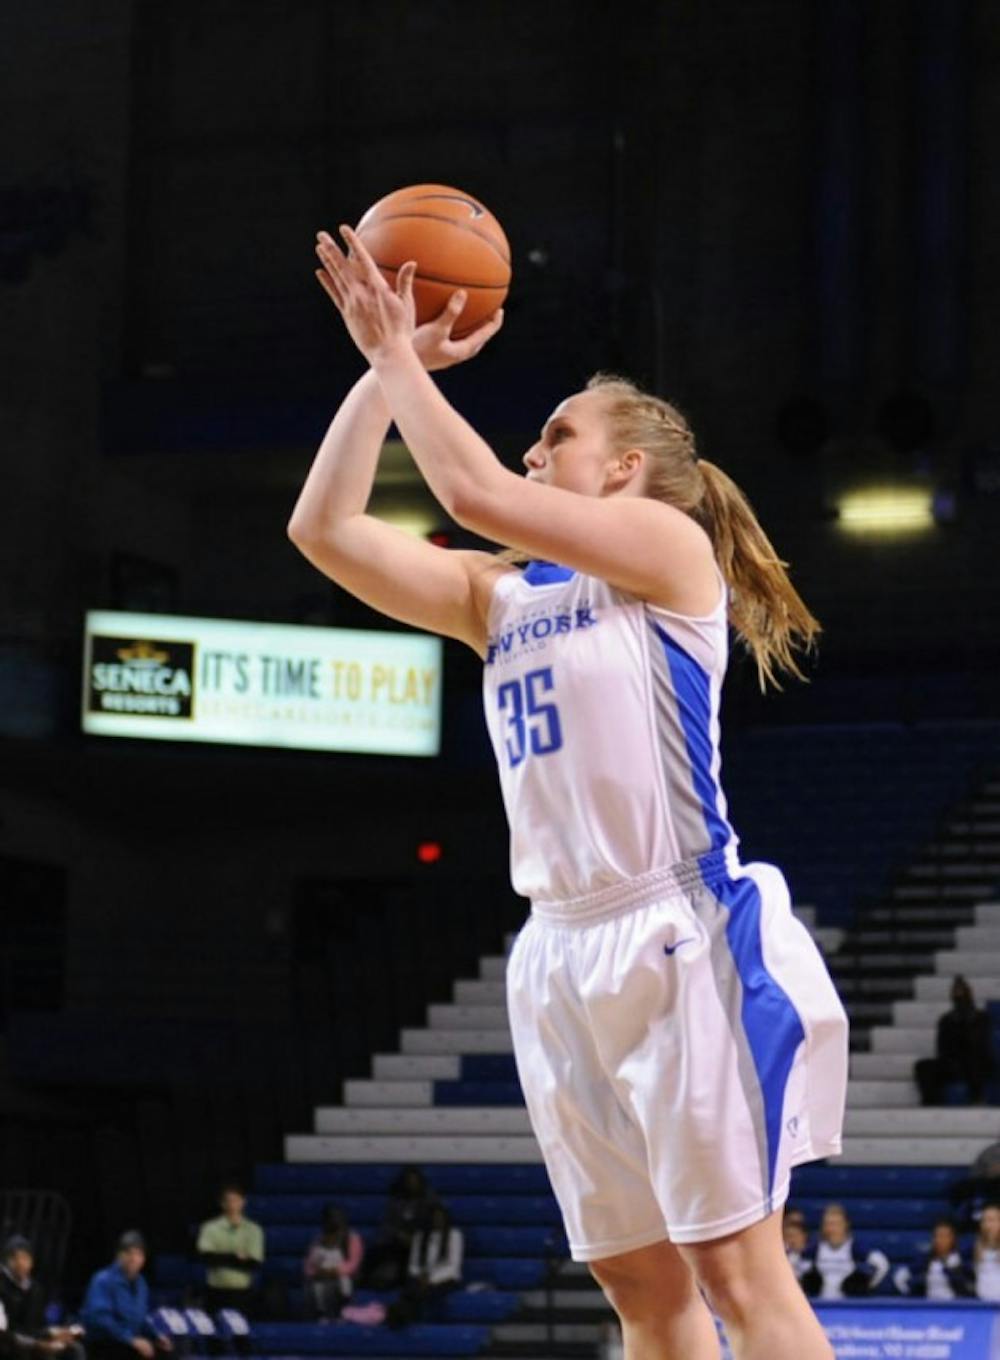 Junior guard Mackenzie Loesing and the women&rsquo;s basketball team
defeated&nbsp;Bowling Green 66-45 on Saturday in this week&rsquo;s quick hits.&nbsp;
Yusong Shi, The Spectrum